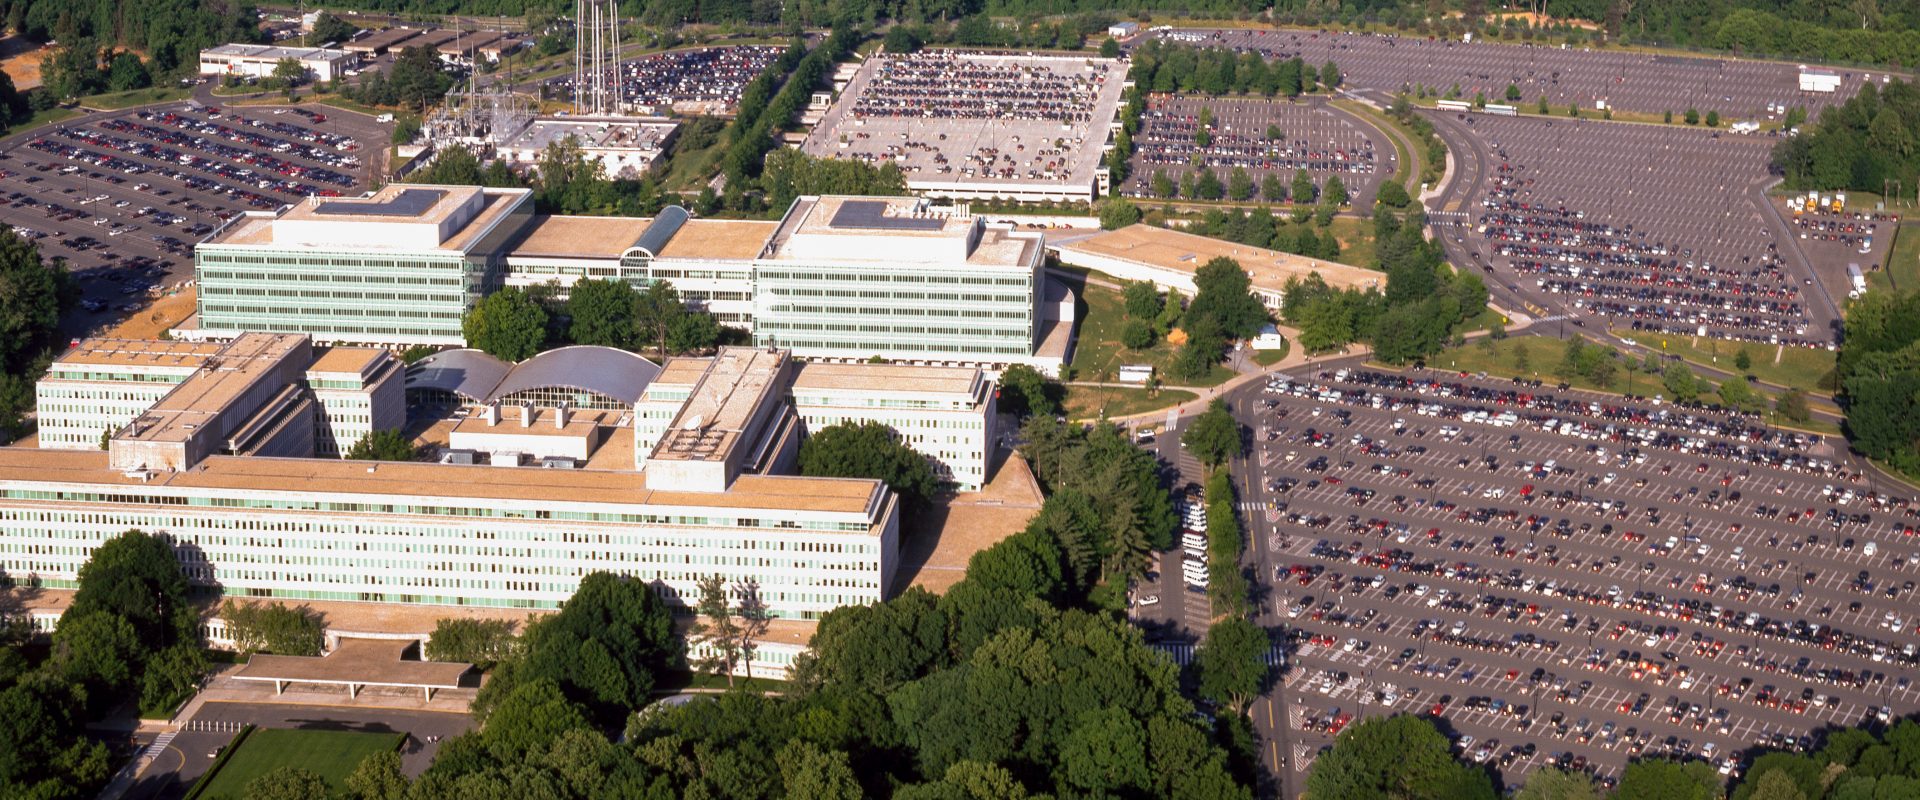 Aerial view of the Central Intelligence Agency headquarters. Ml Ultra Psychedelics